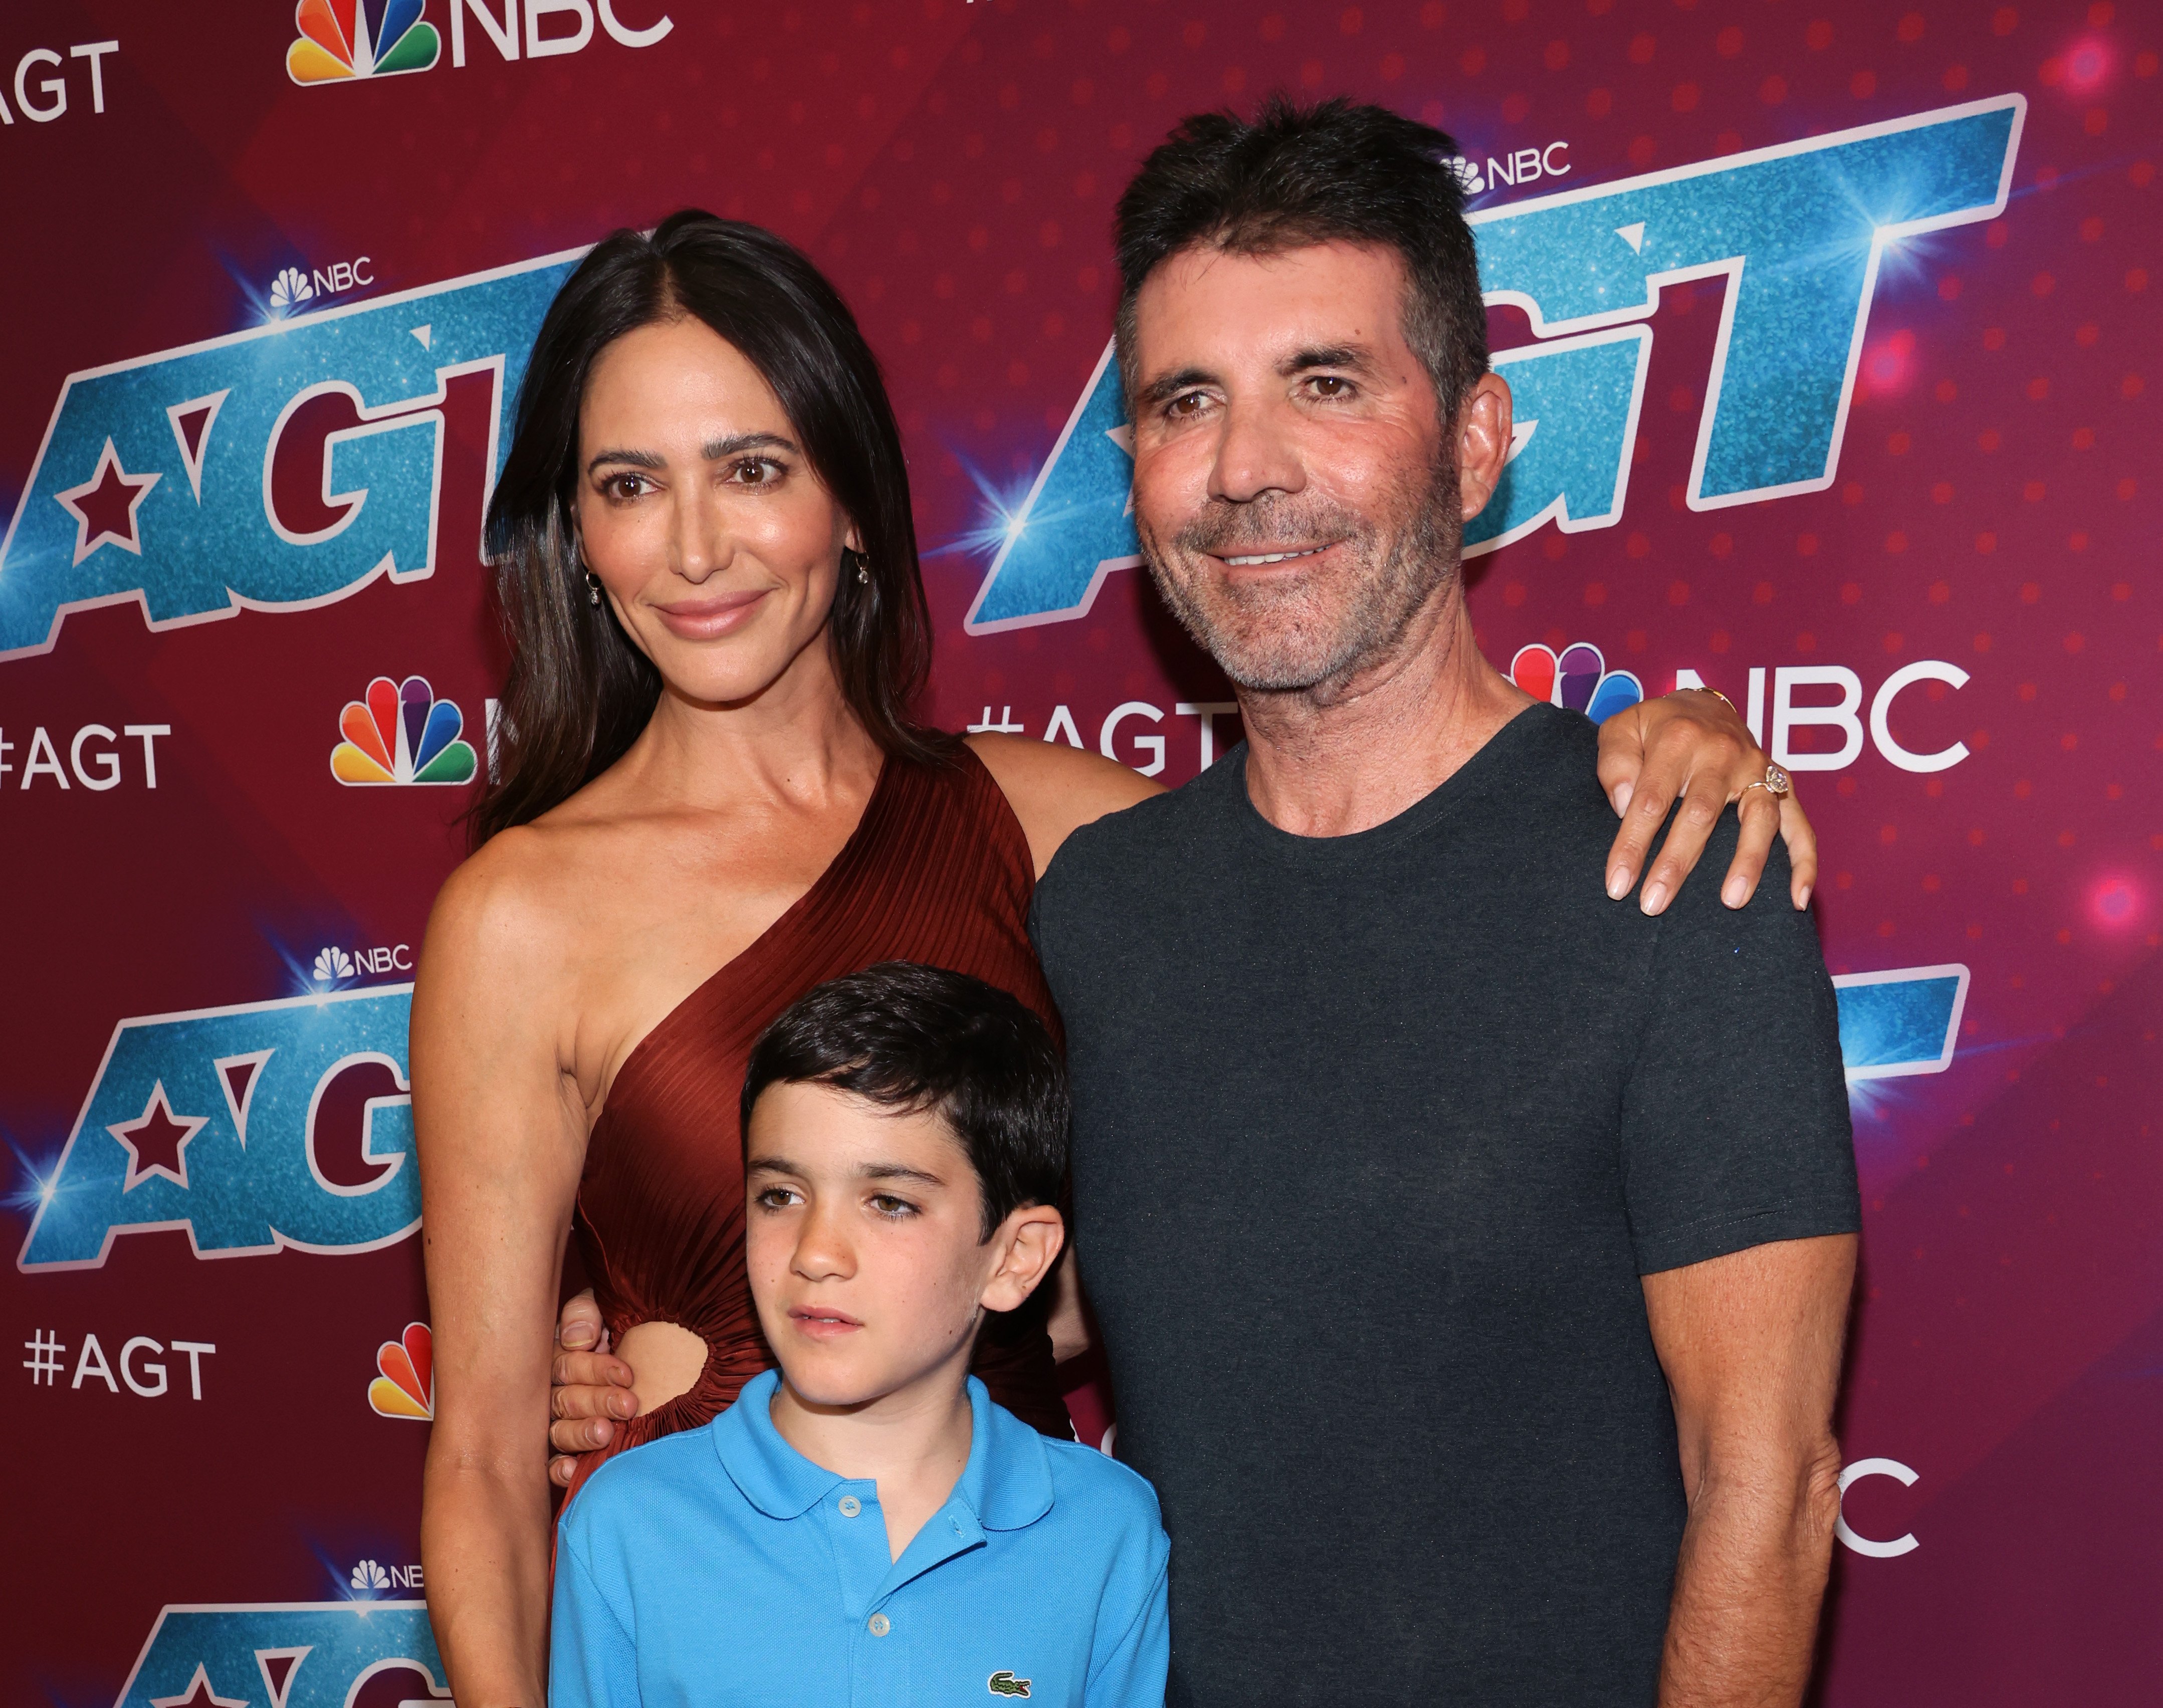  Lauren Silverman, Eric Cowell and Simon Cowell attend the red carpet for "America's Got Talent" Season 17 live show  in September 2022 in Pasadena, California. | Source: Getty Images